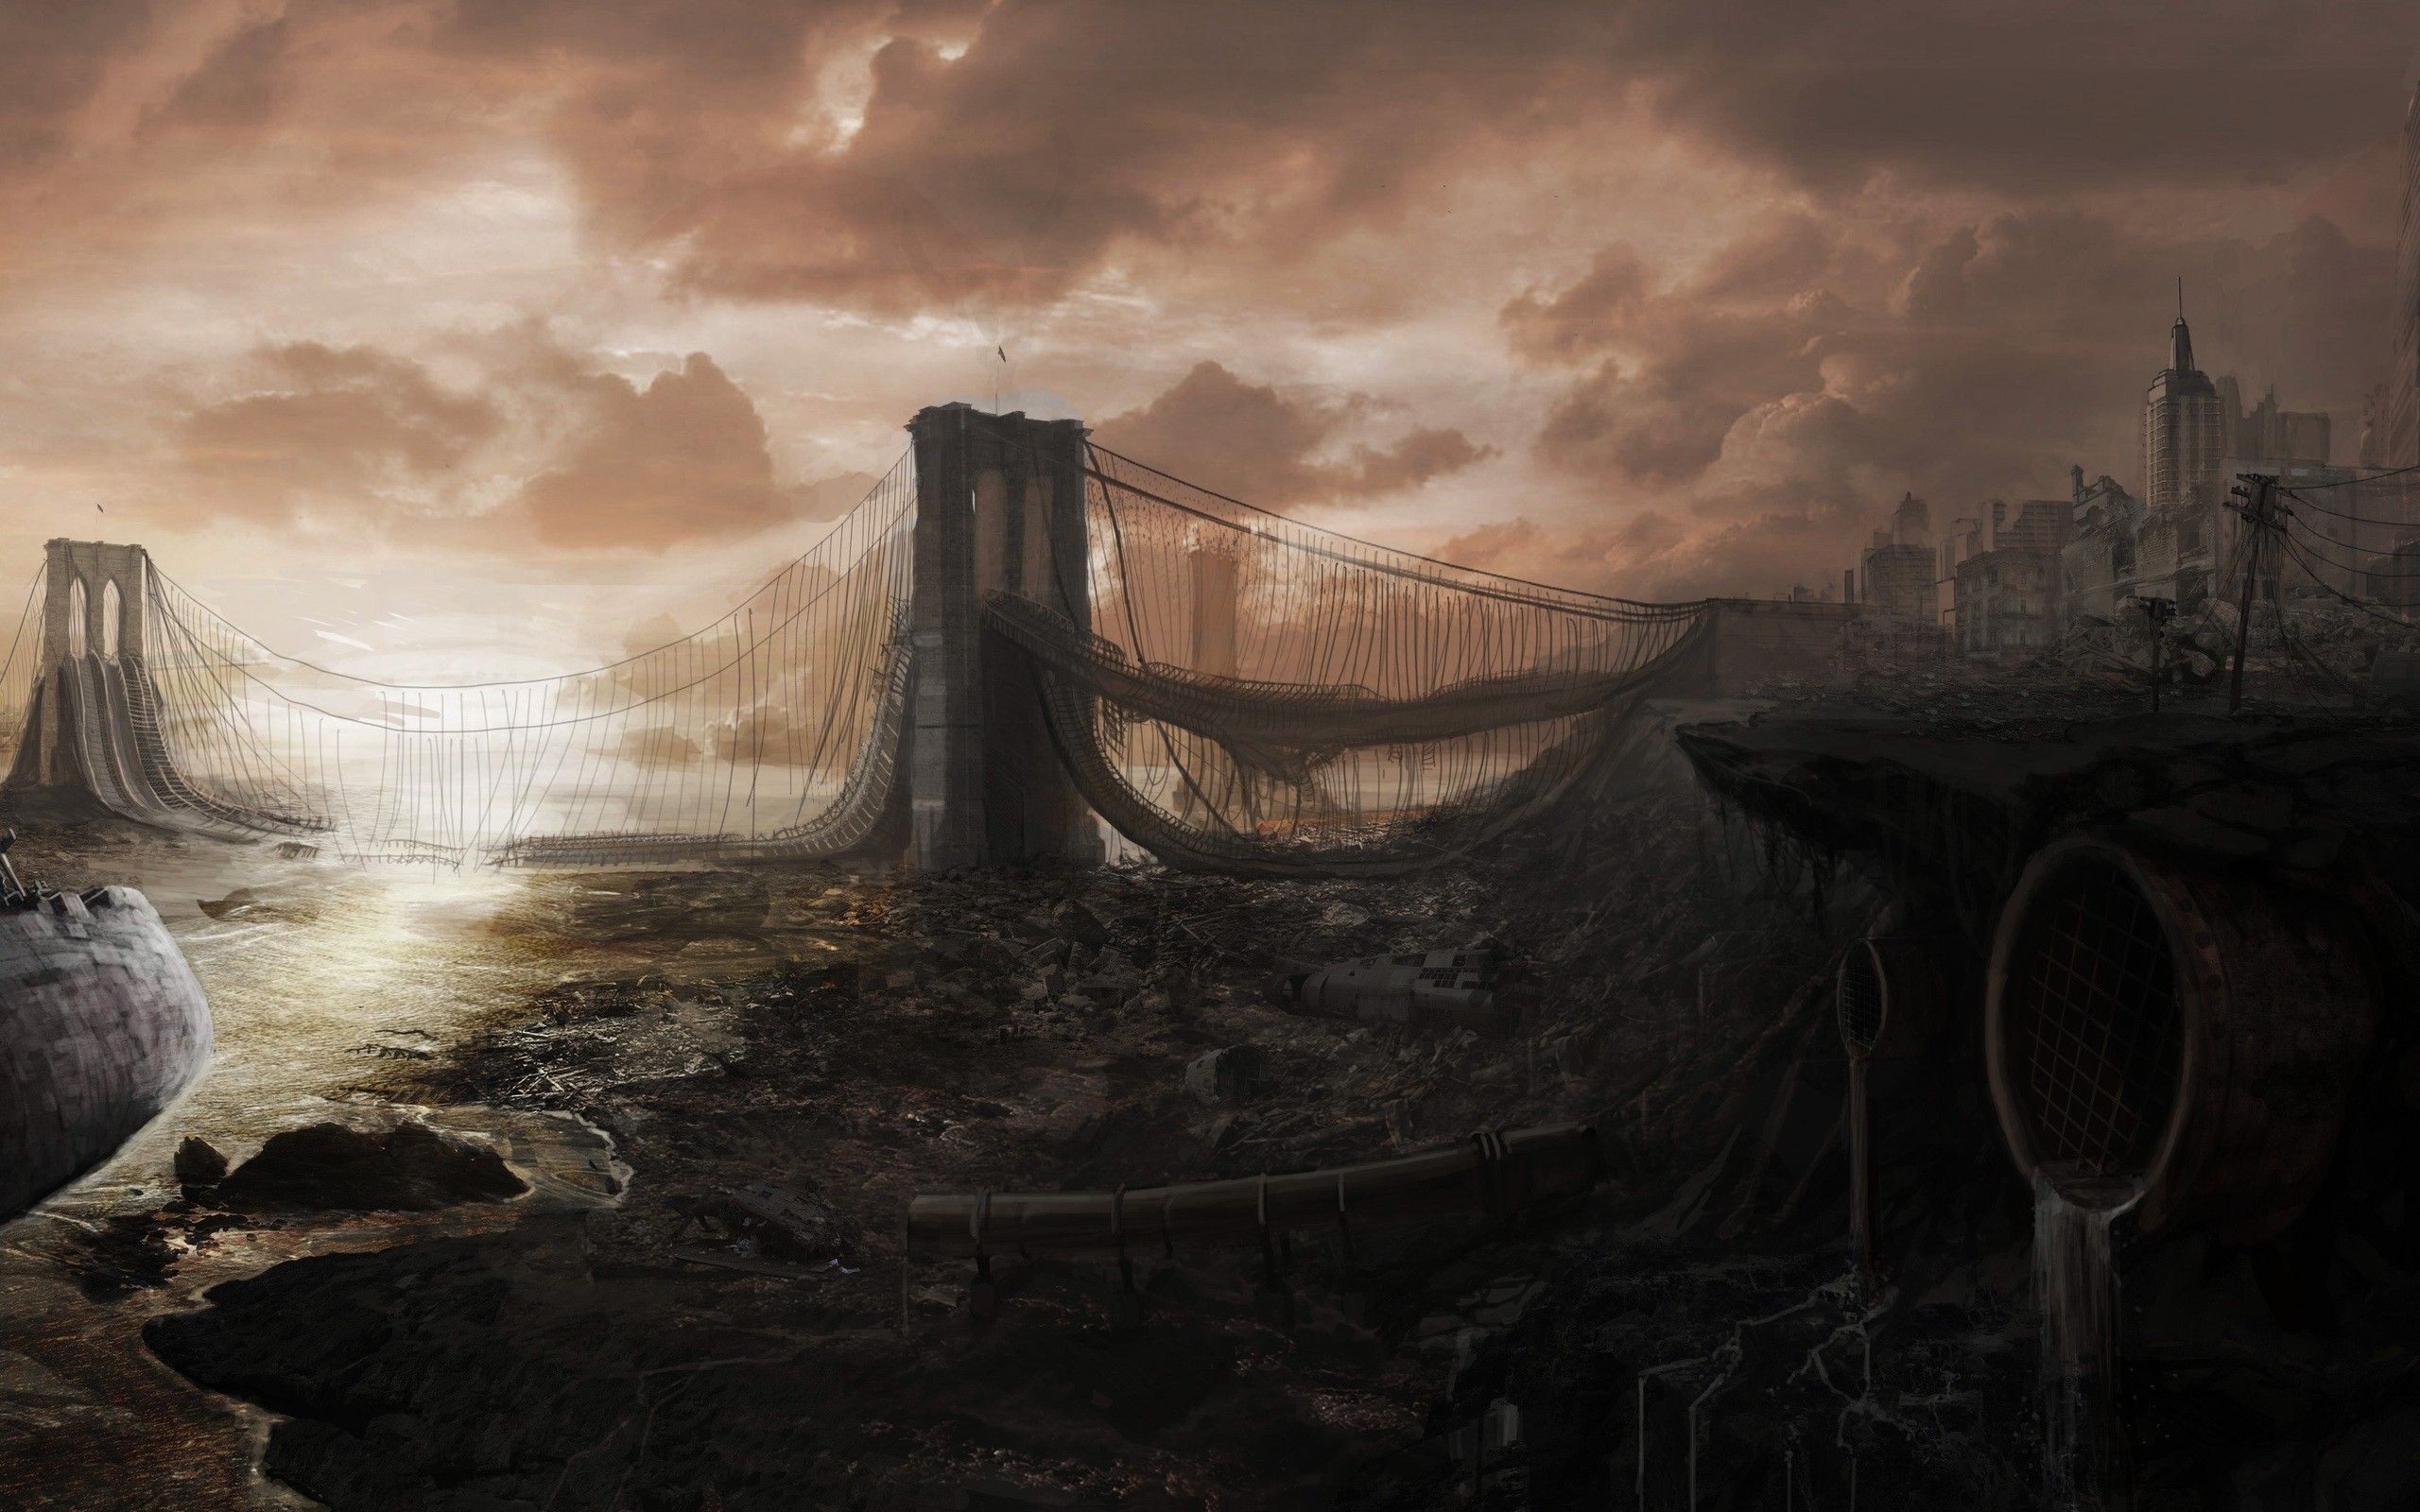 Post Apocalyptic Dystopian Wallpaper Dump! (As Requested By RayquazasDarkBrother). Post Apocalyptic Art, Post Apocalyptic, City Artwork